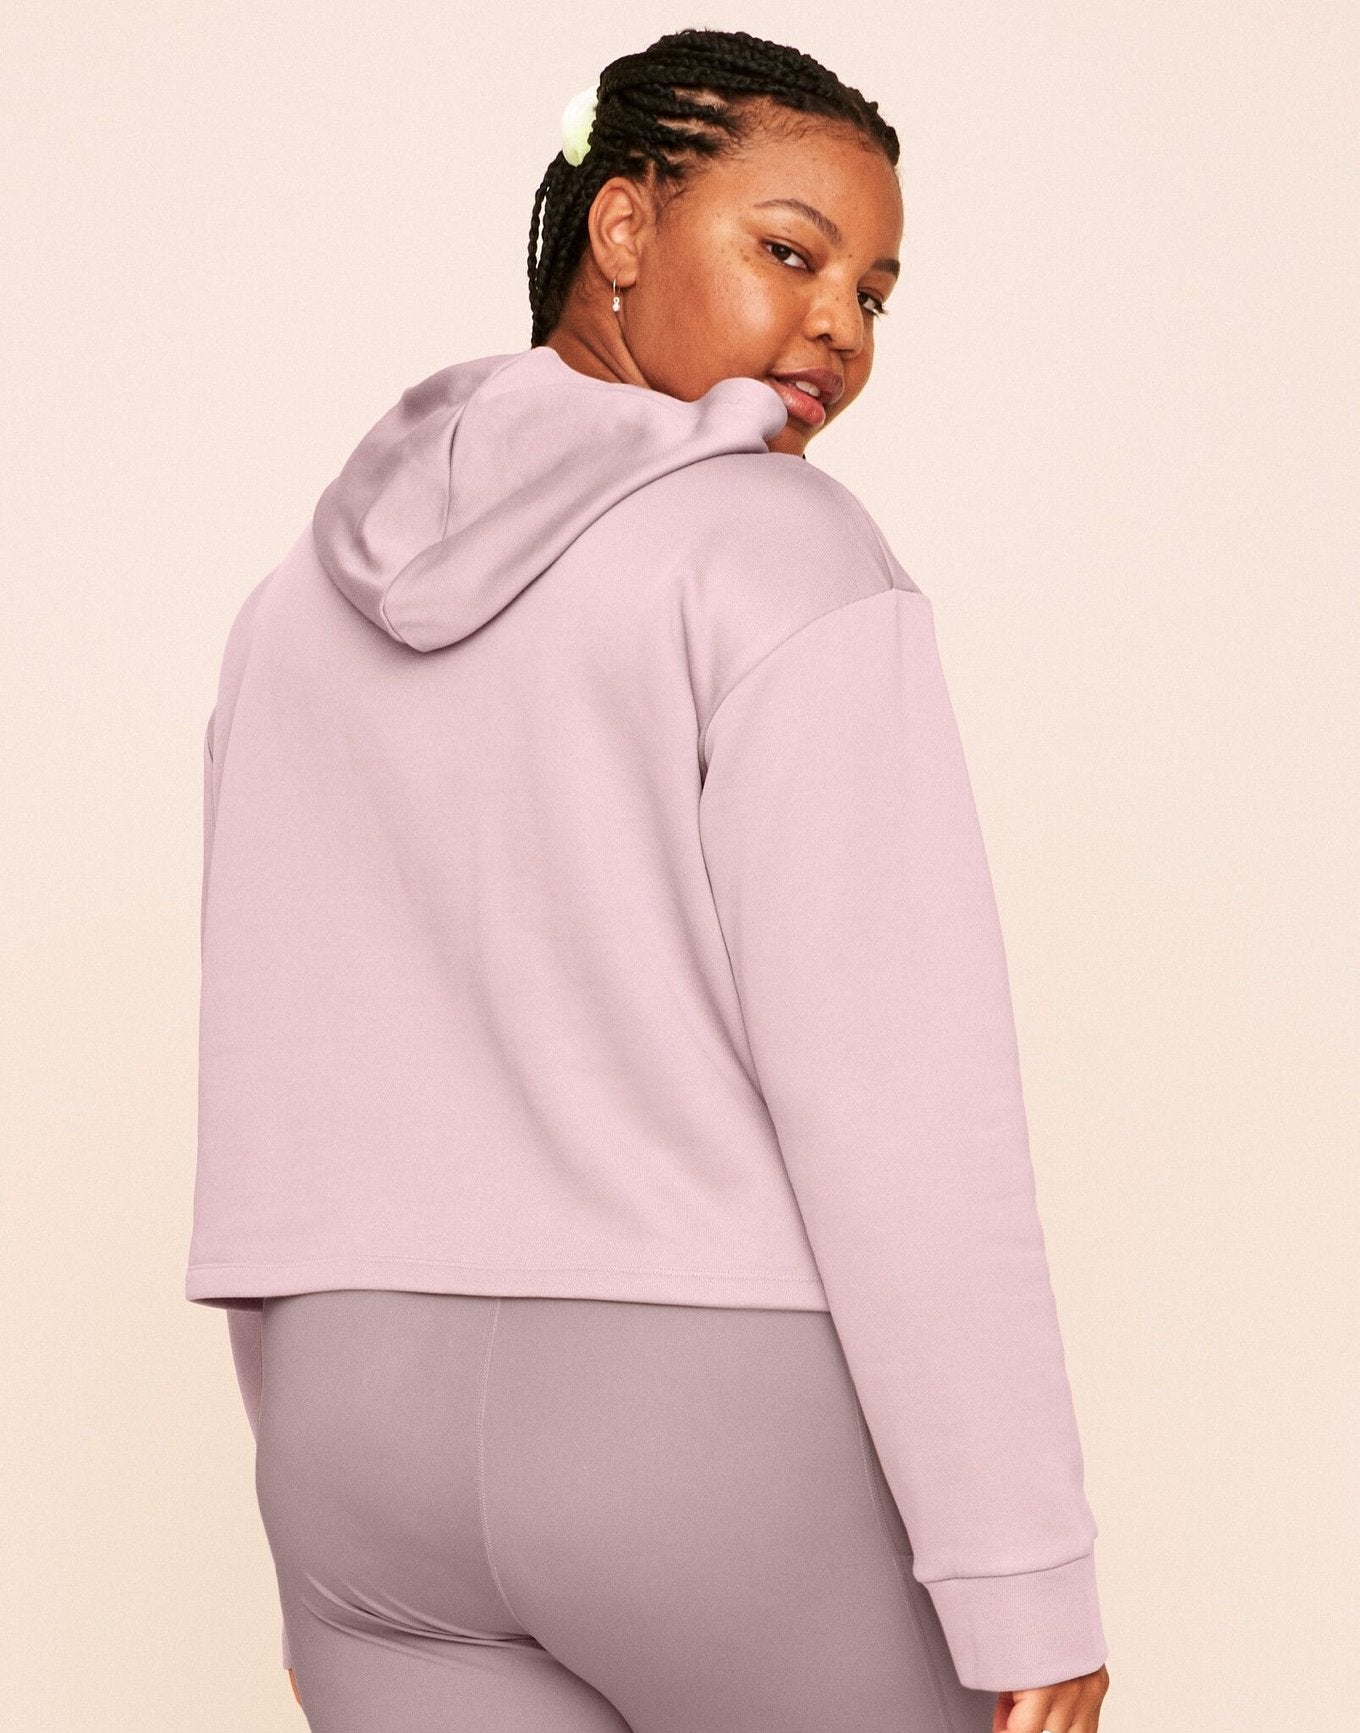 Earth Republic Myah Escape Luxe Hoodie Cropped Hoodie in color Chalk Pink and shape hoodie